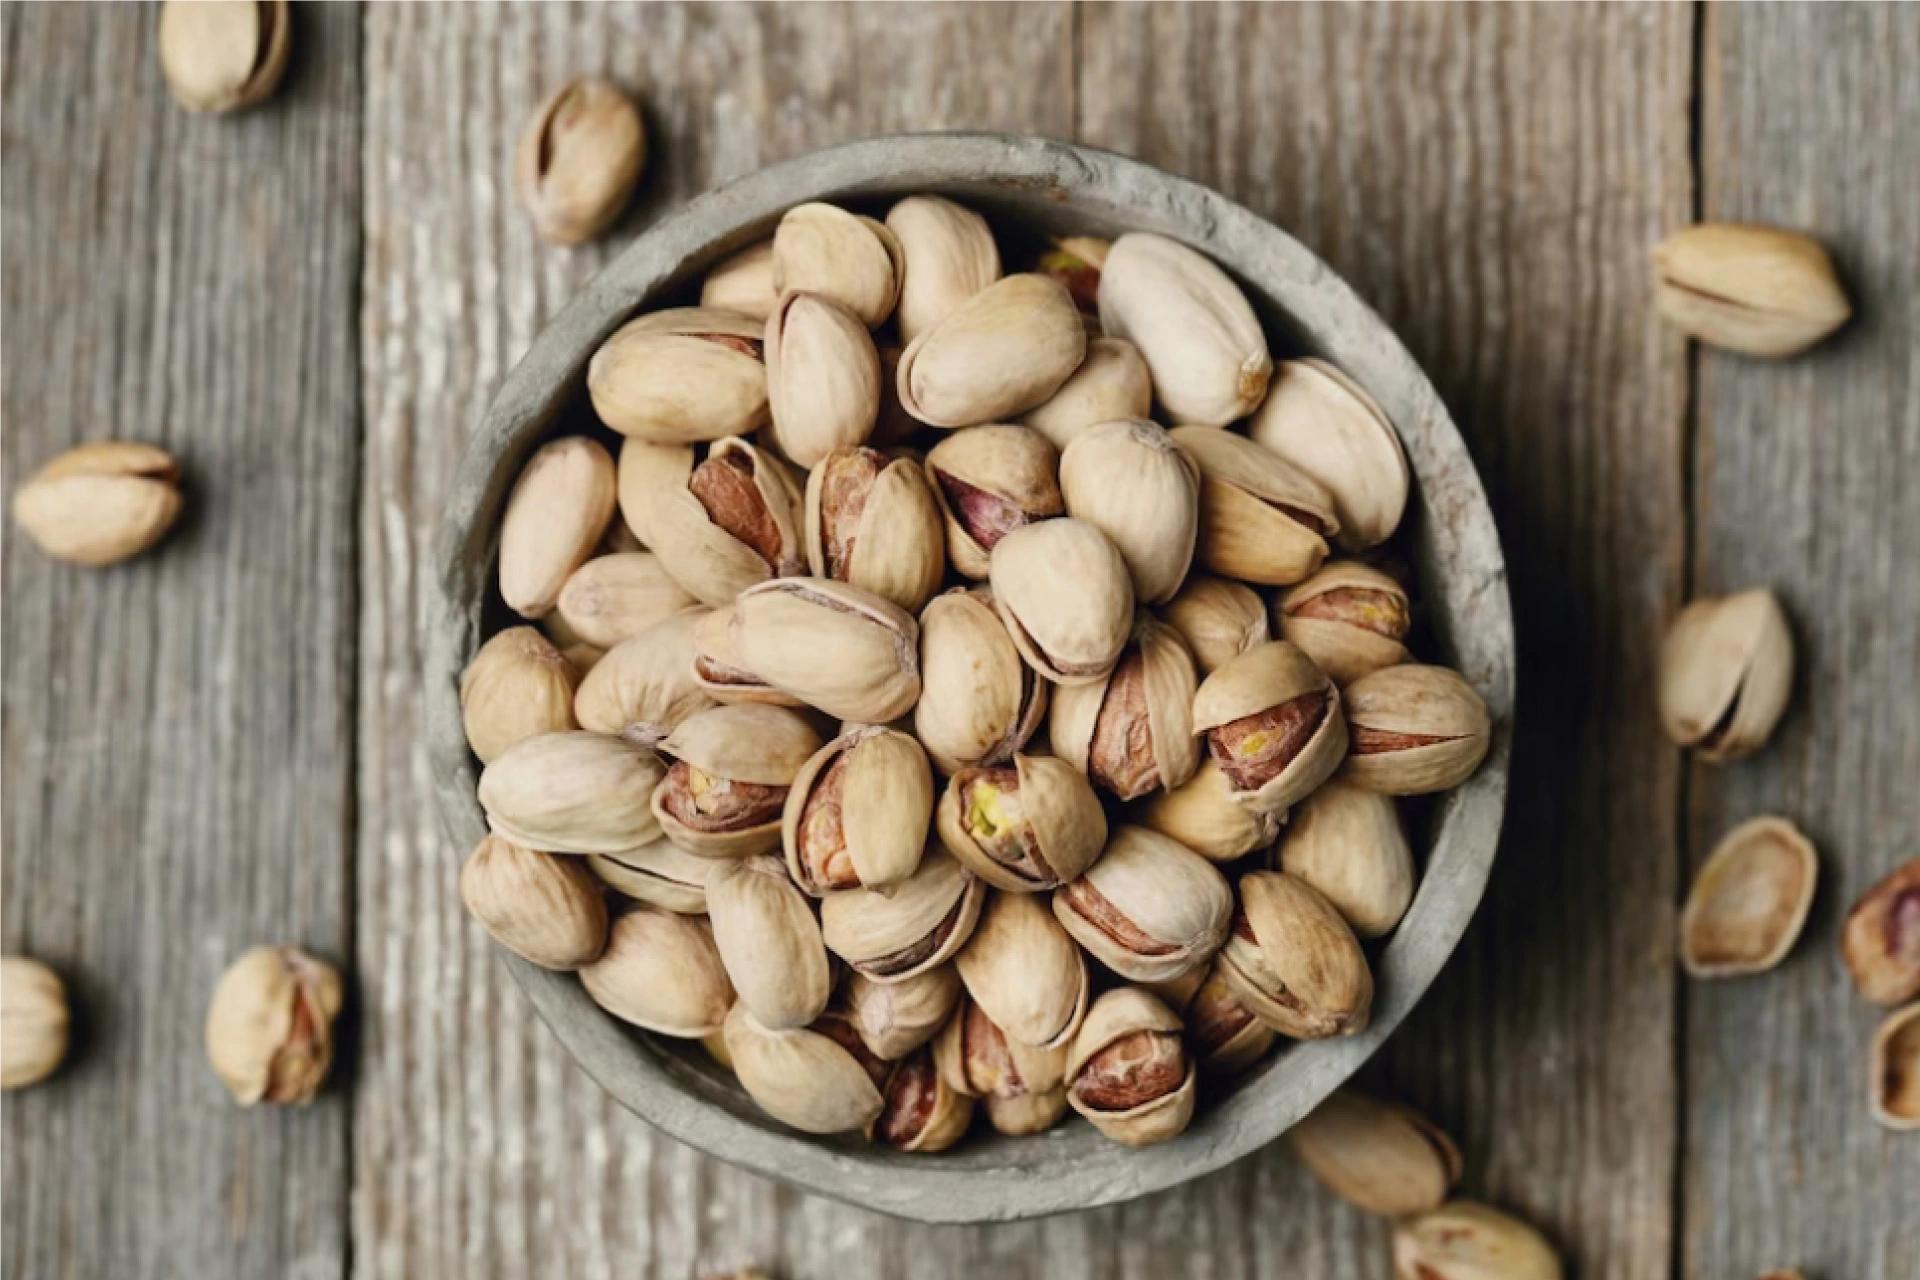 Pistachios: Know the Health Benefits of This Nutty Delight